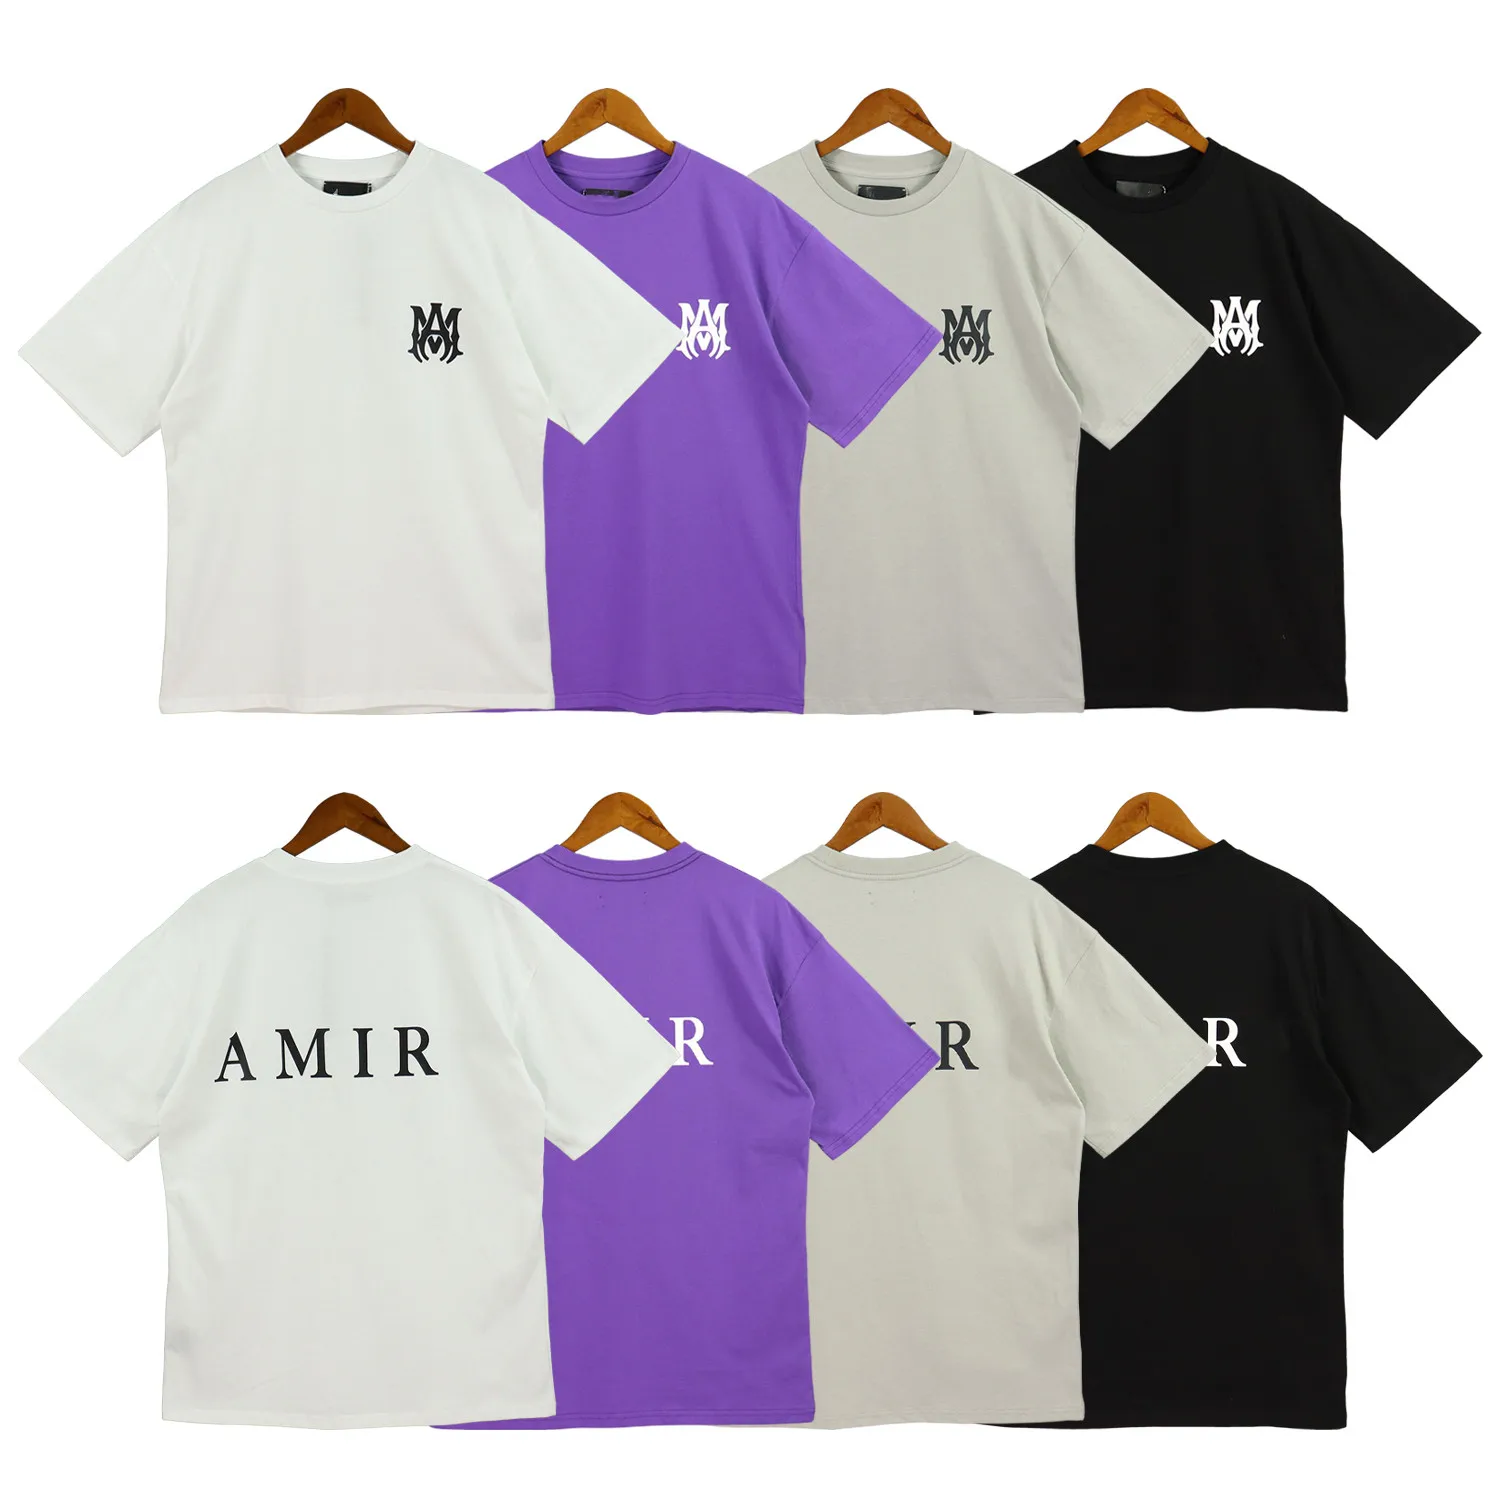 

2023 New Cotton Amir T-shirts for Mens Womens Short Sleeve Male Letters Print Tshirt Graffiti Couples Tees Tops Pullover Shirts